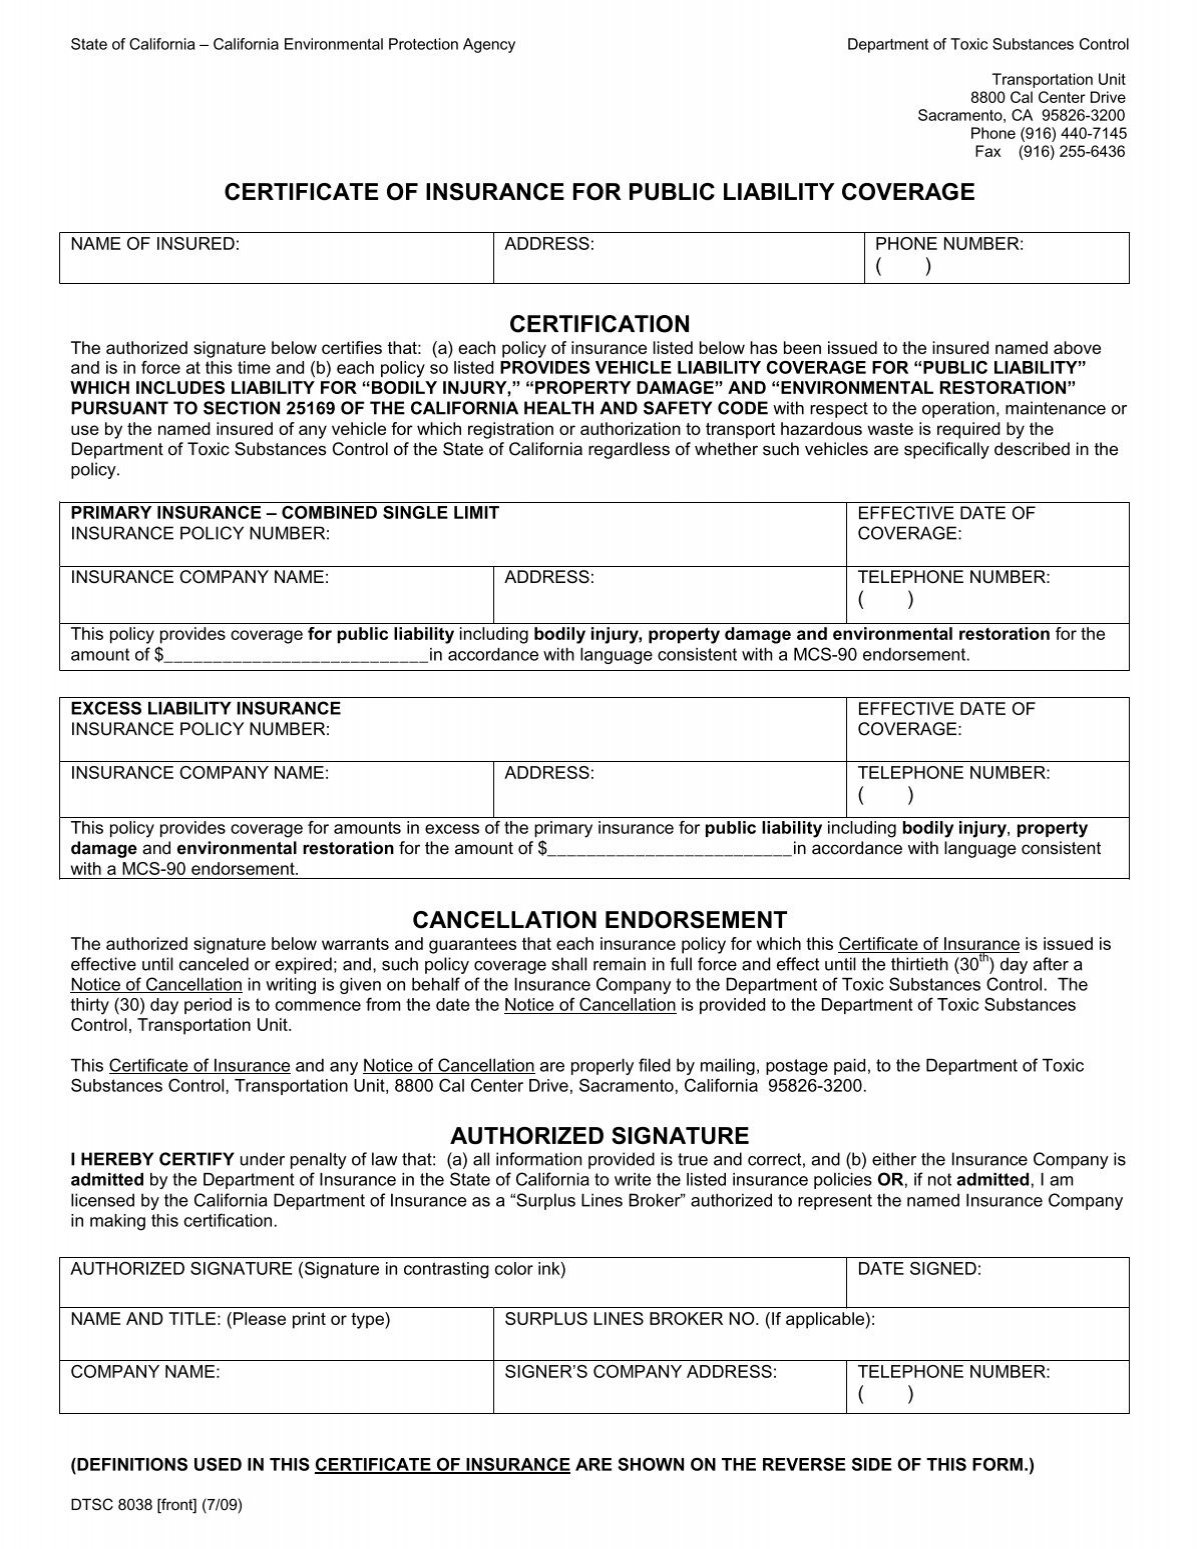 Certificate of Insurance for Public Liability Coverage DTSC 8038